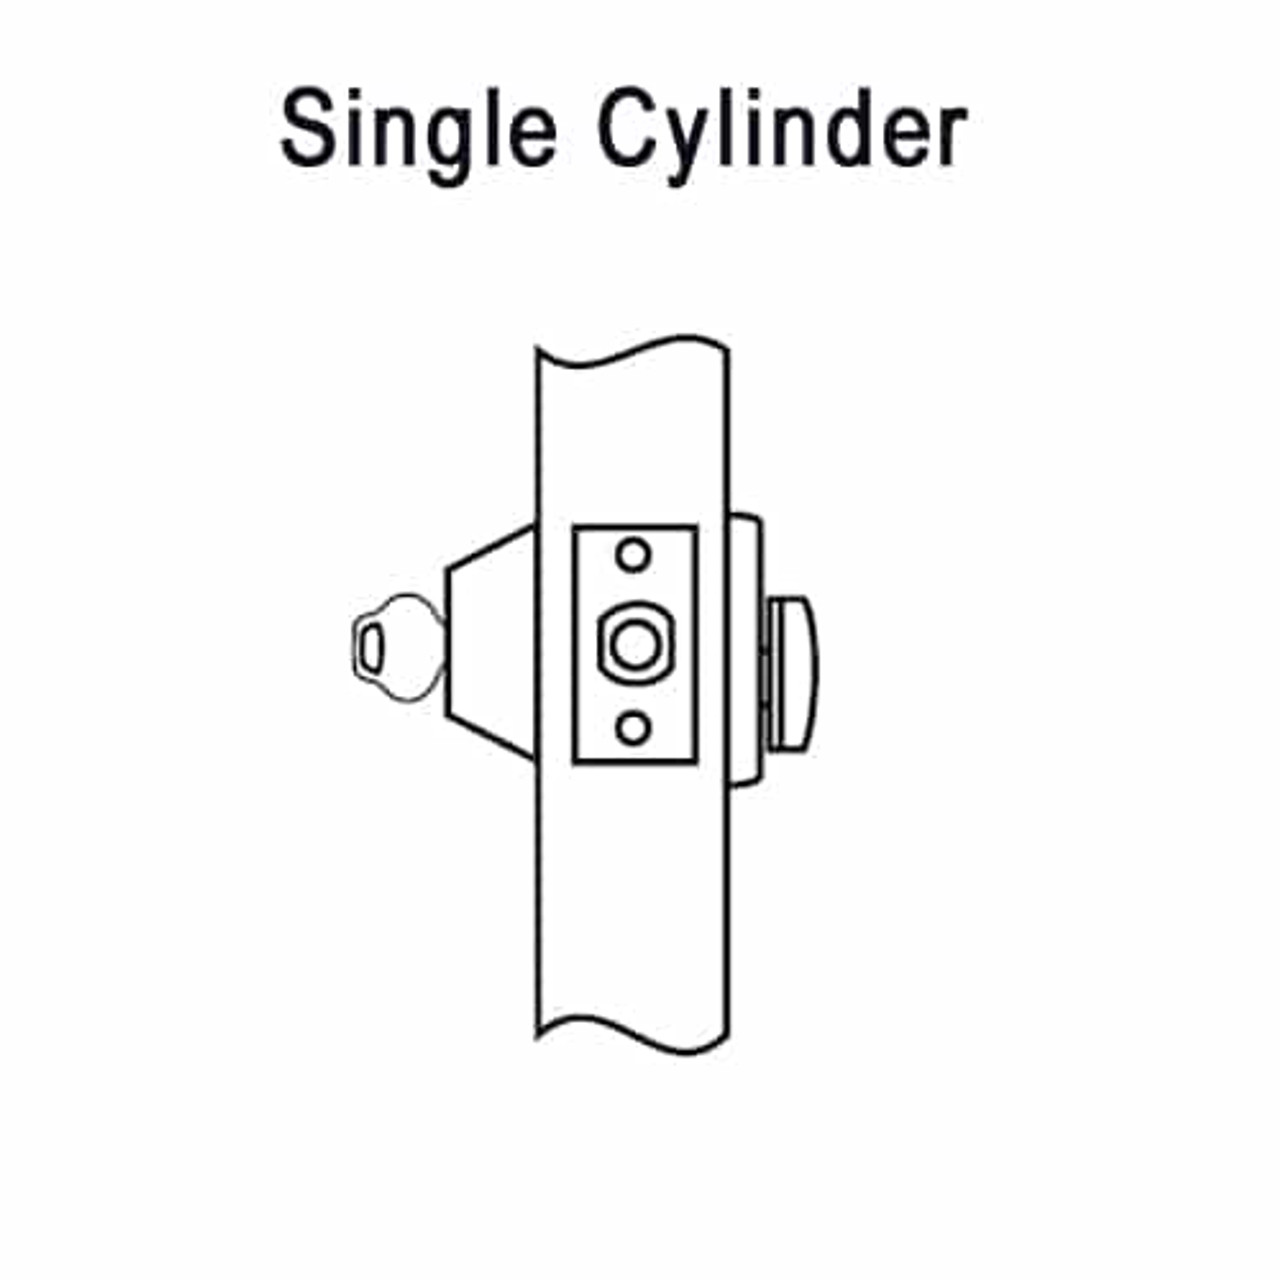 DL3213-605 Corbin DL3200 Series Cylindrical Deadlocks with Single Cylinder in Bright Brass